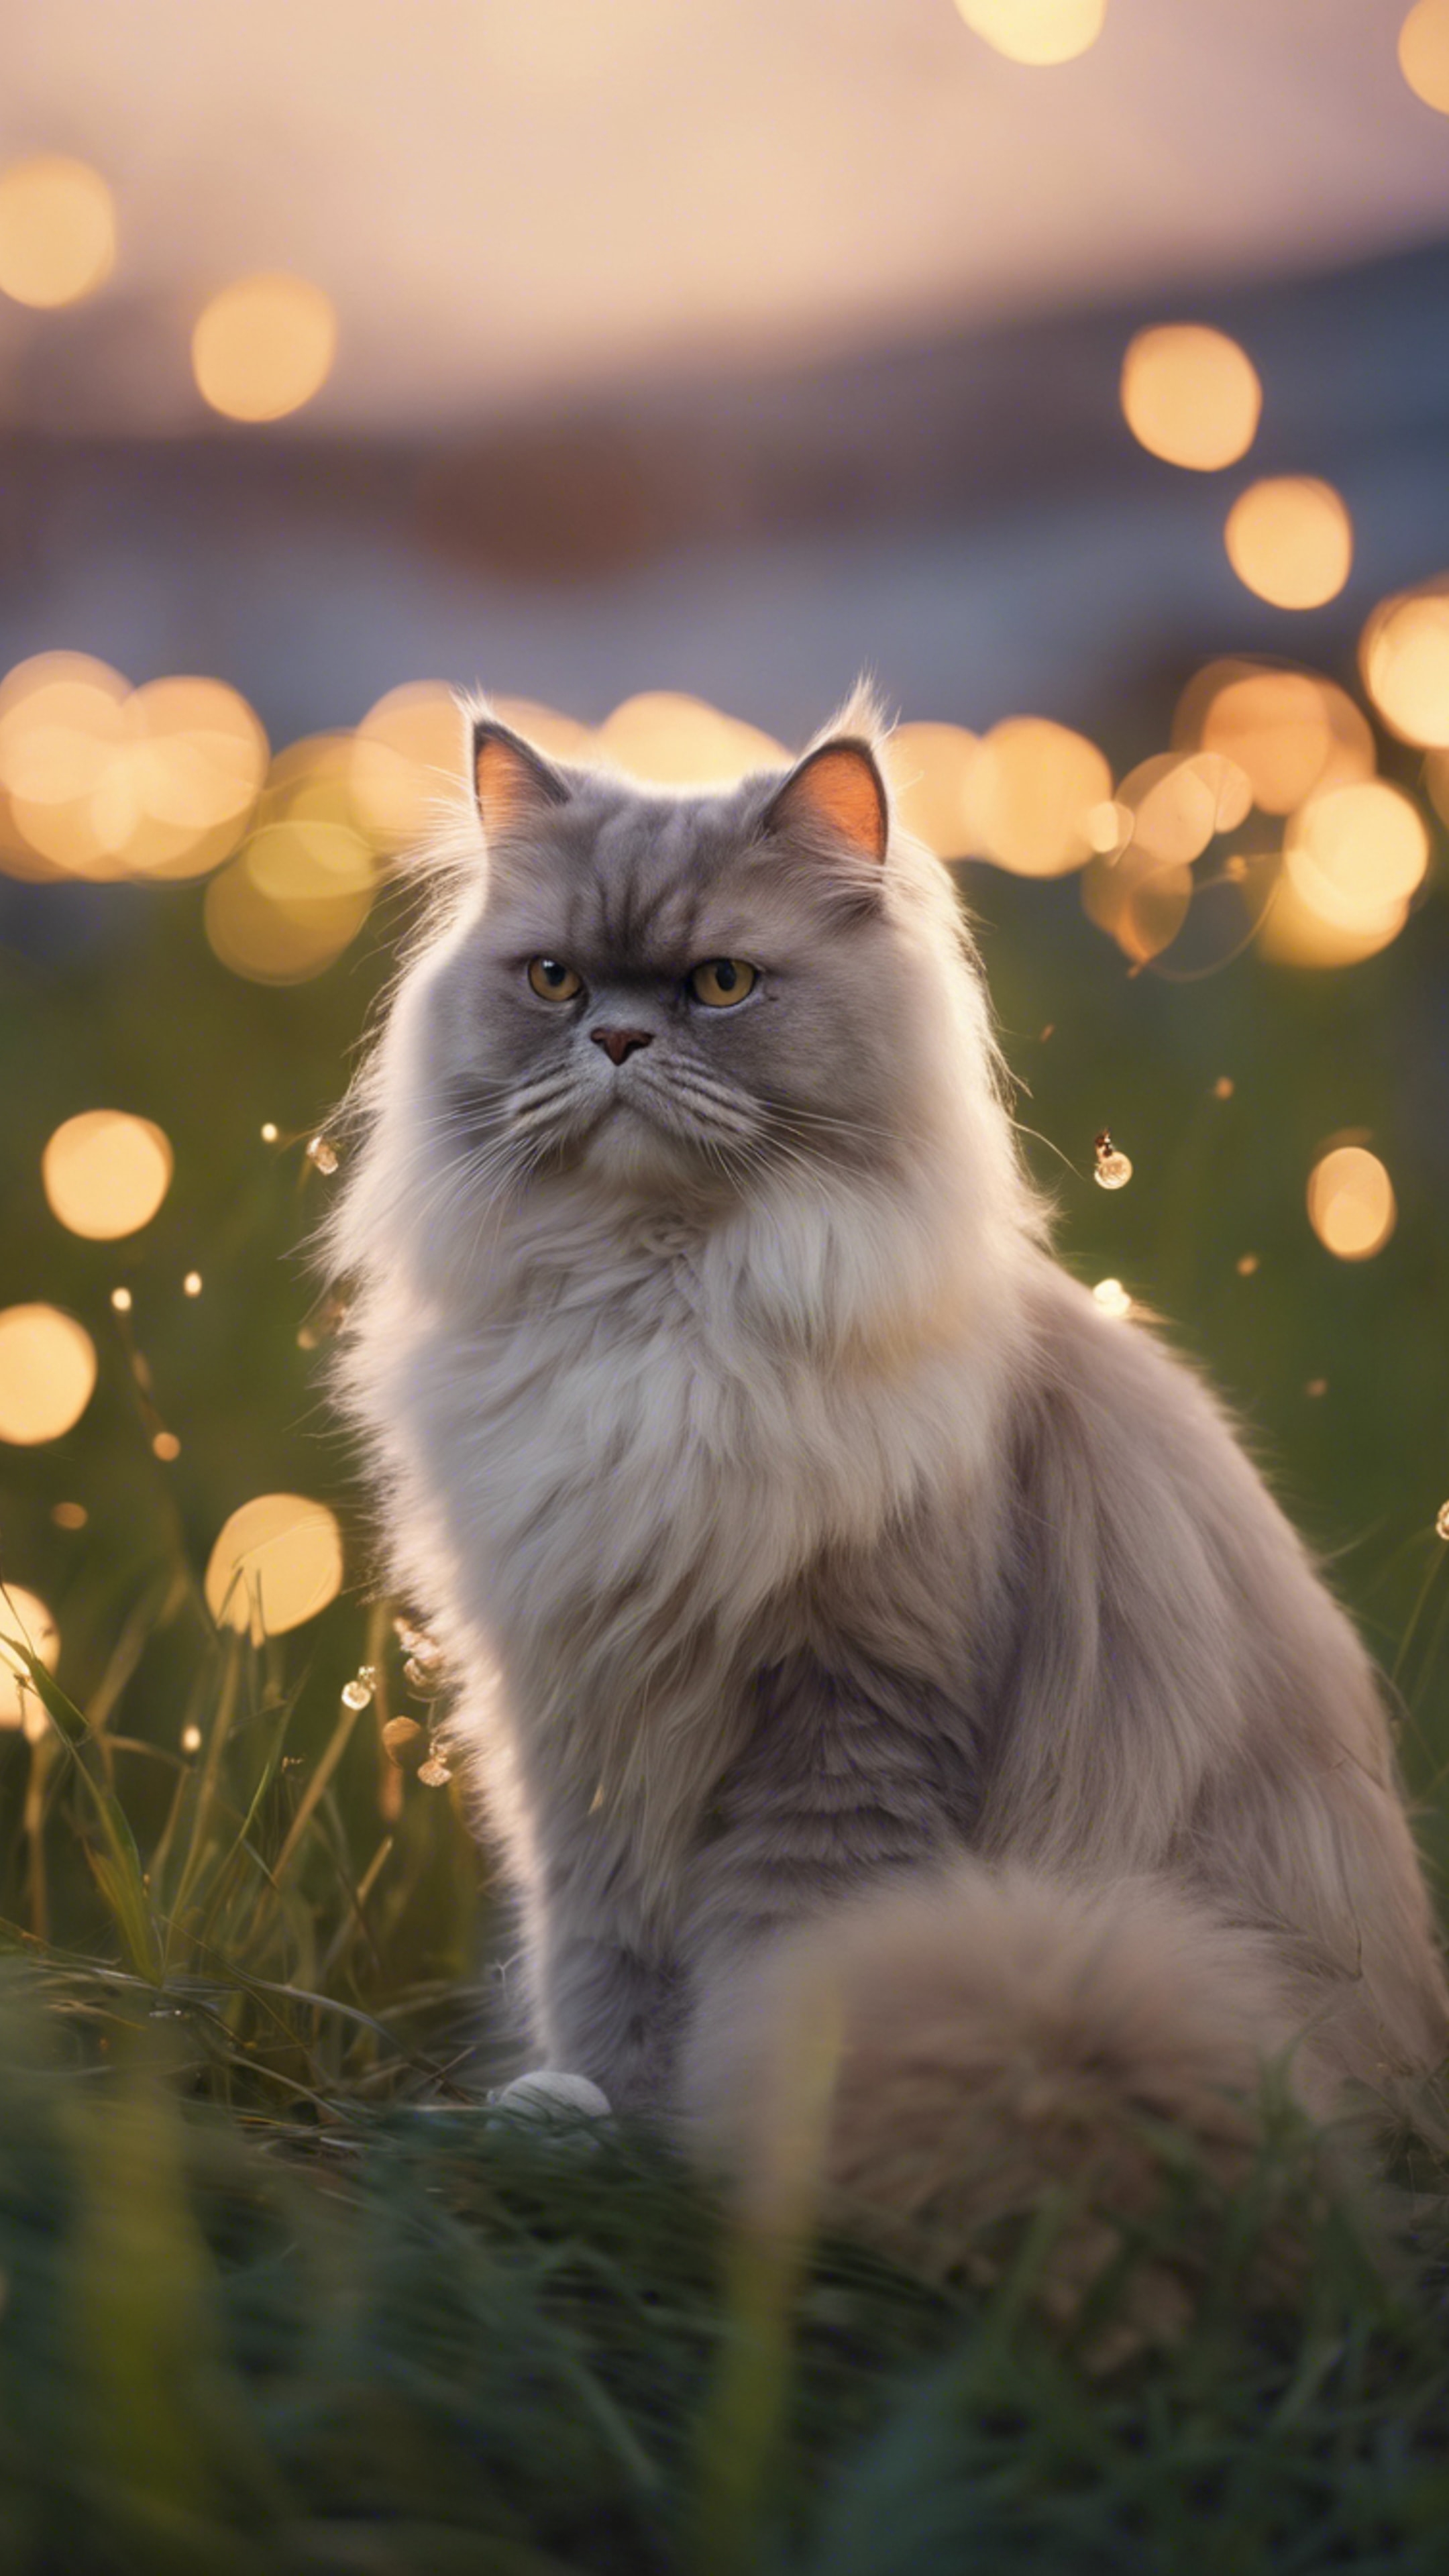 A Persian cat sitting atop a grassy knoll at dusk, surrounded by a halo of fireflies.壁紙[c22c0d06fb464e67bbd0]